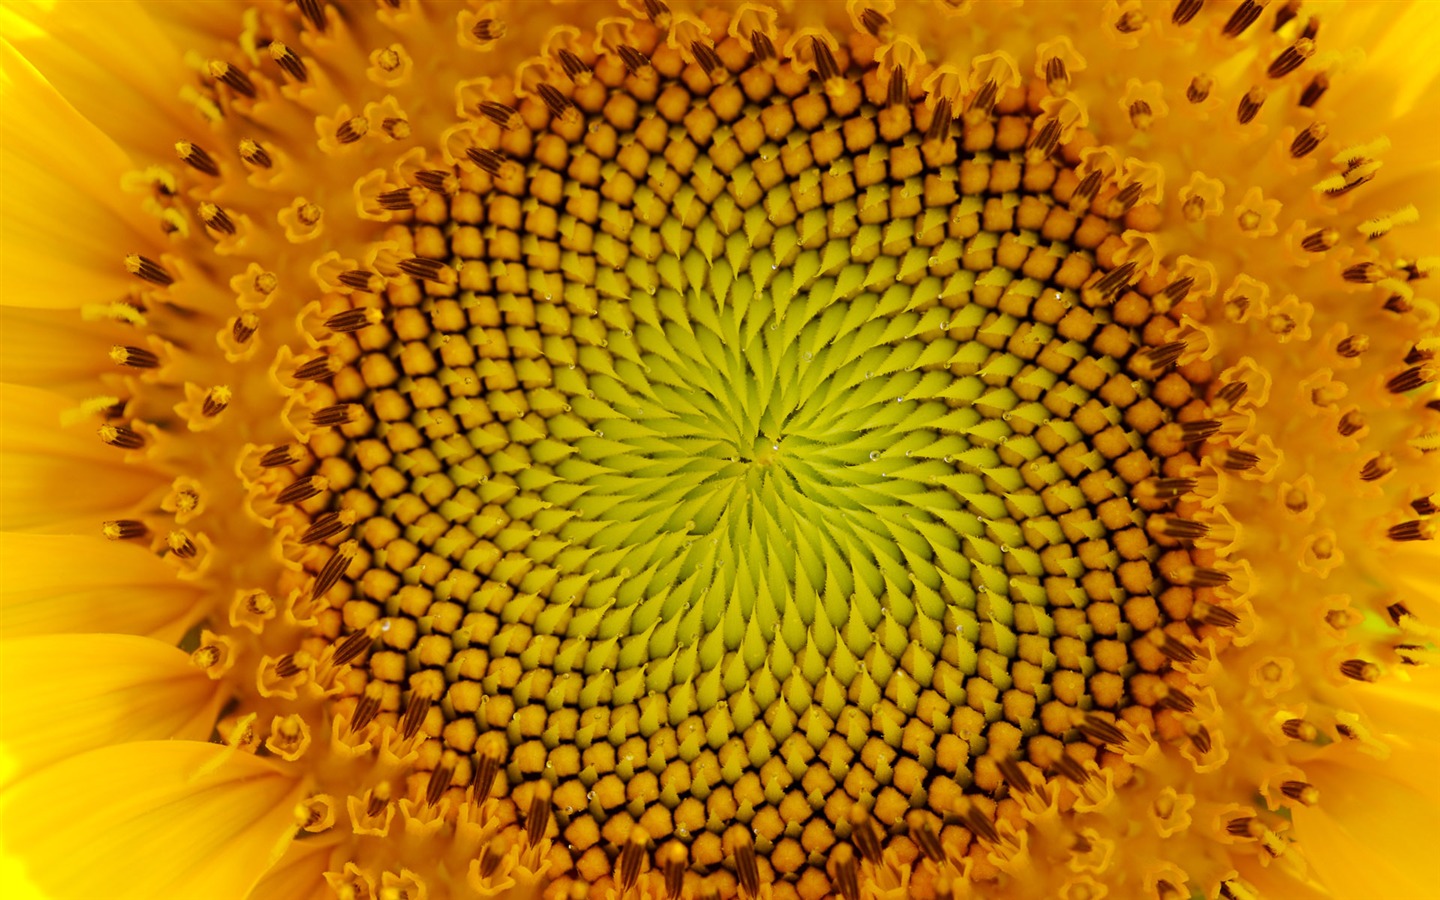 Sunny sunflower photo HD Wallpapers #30 - 1440x900